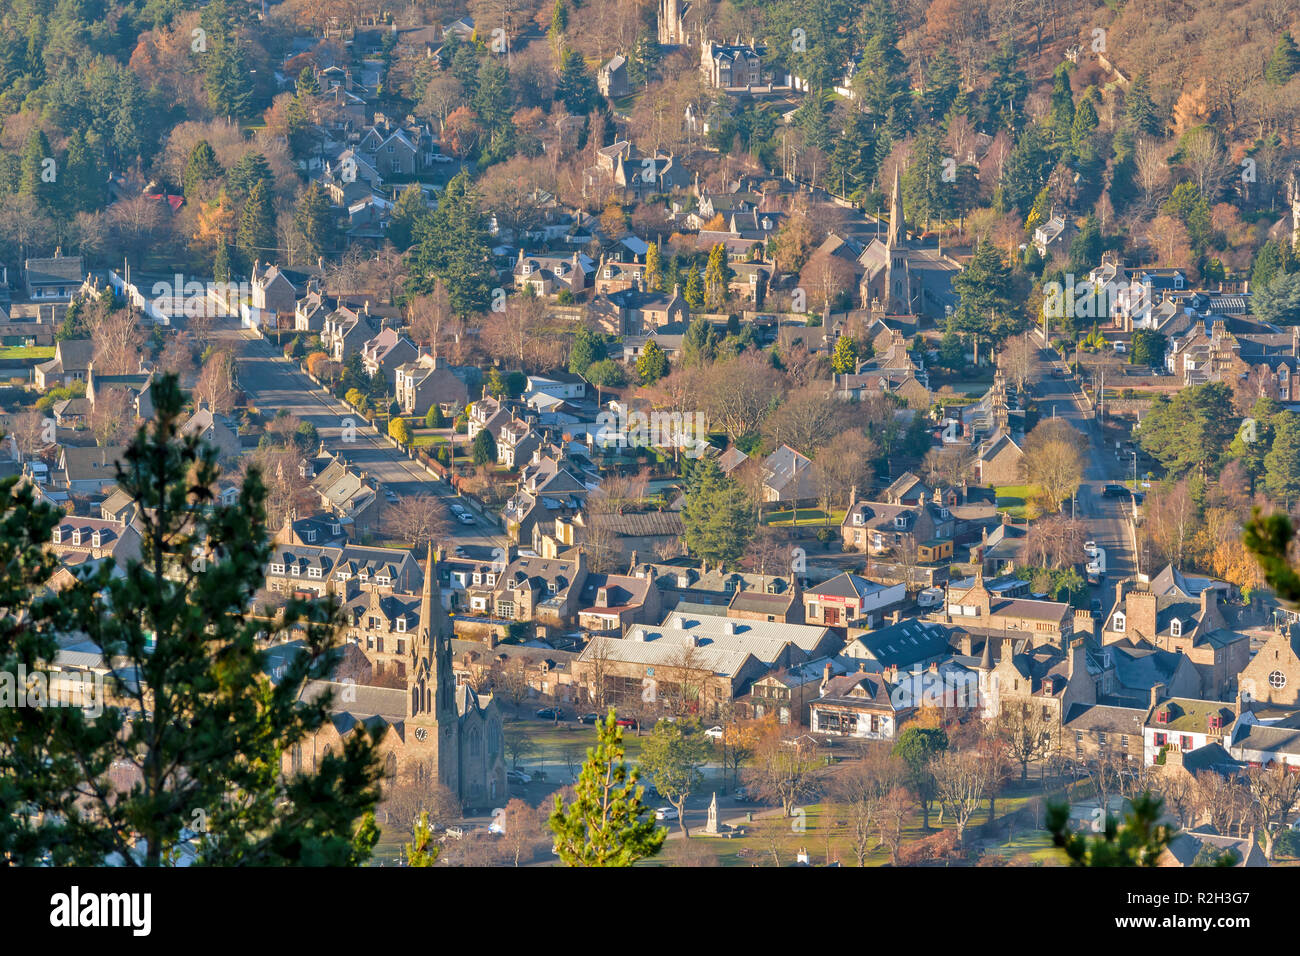 BALLATER ABERDEENSHIRE SCOTLAND HOUSES CHURCHES AND STREETS SEEN FROM CREAG COILLICH HILL Stock Photo